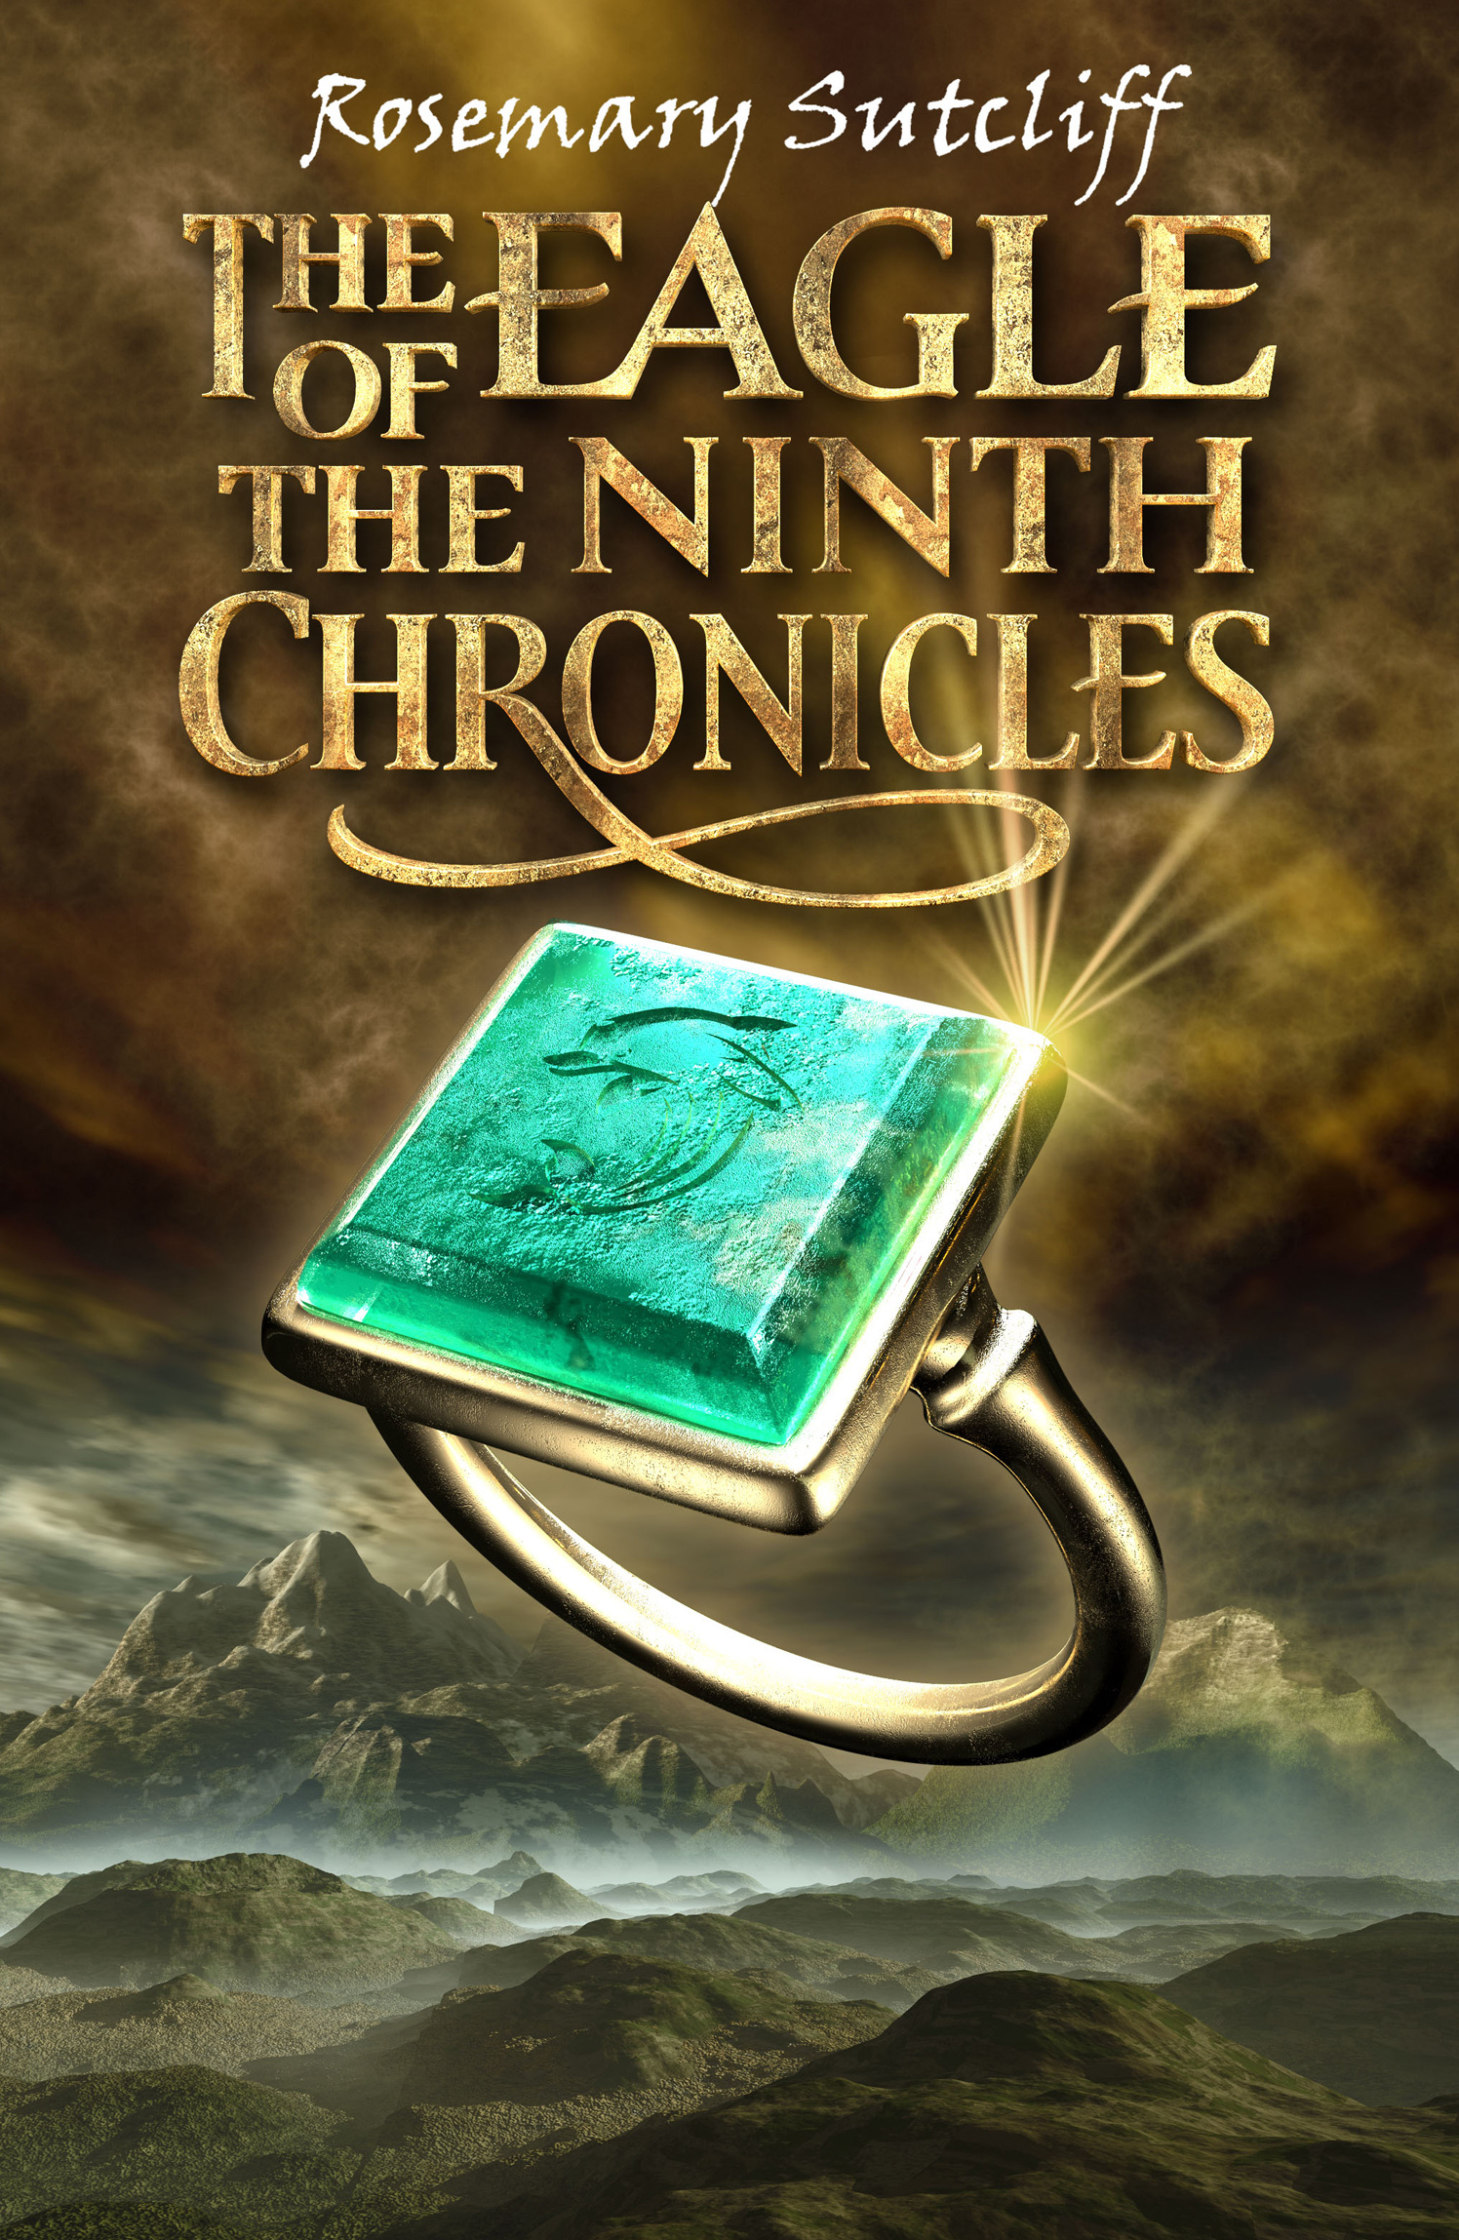 The Eagle Of The Ninth Chronicles